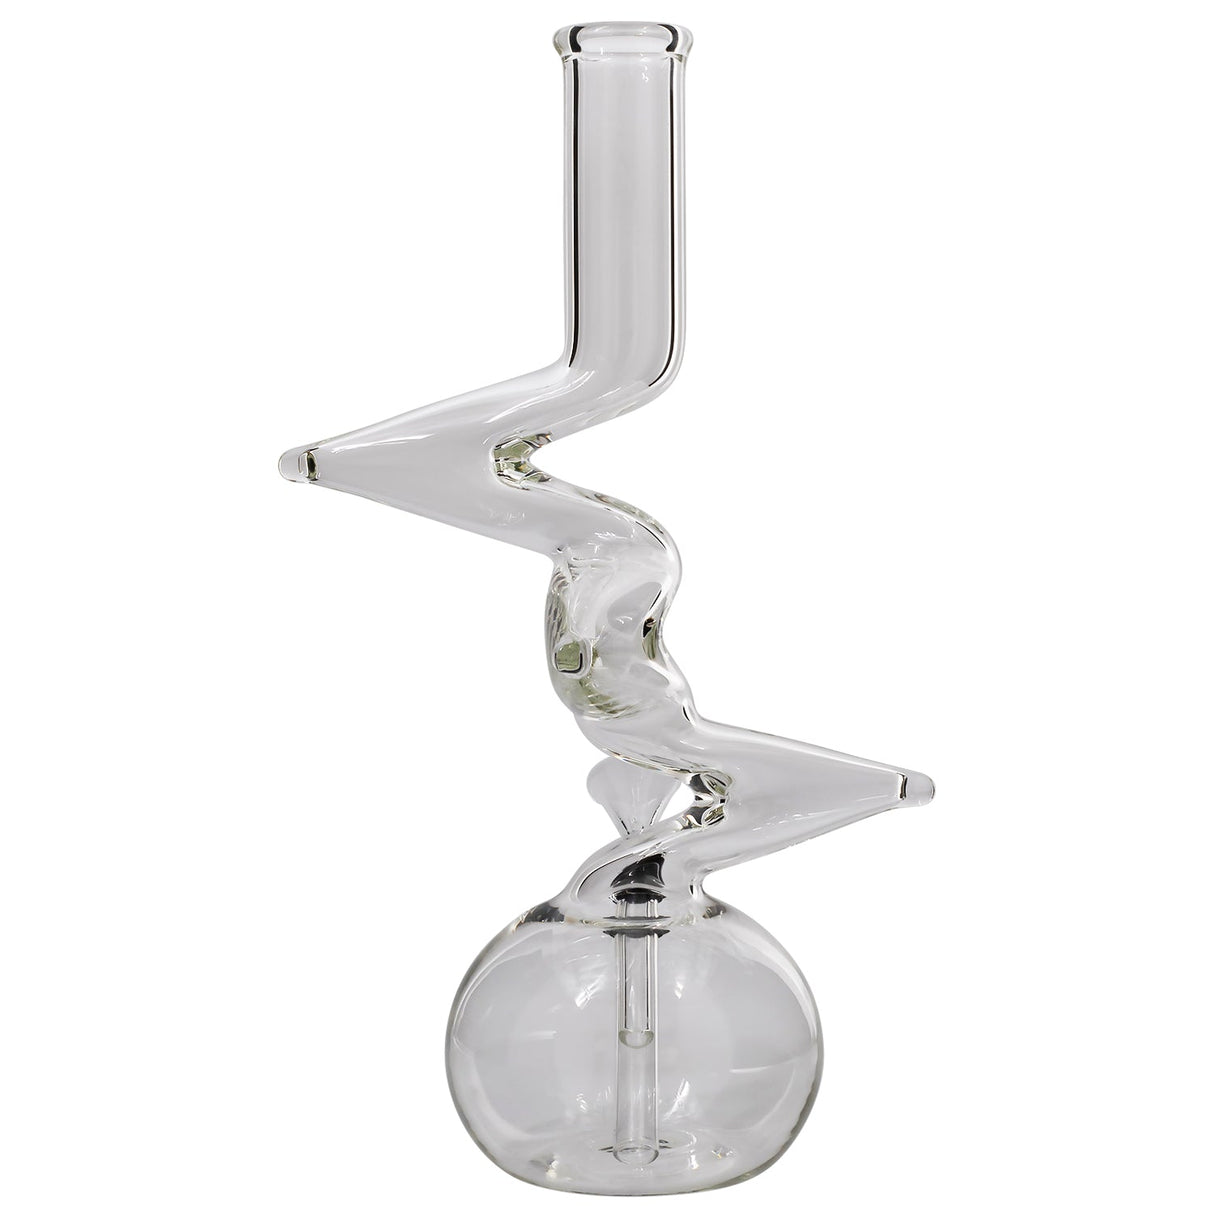 LA Pipes "Jacobs Ladder" Clear Zong Bong with unique zigzag design, 12" tall, made of borosilicate glass